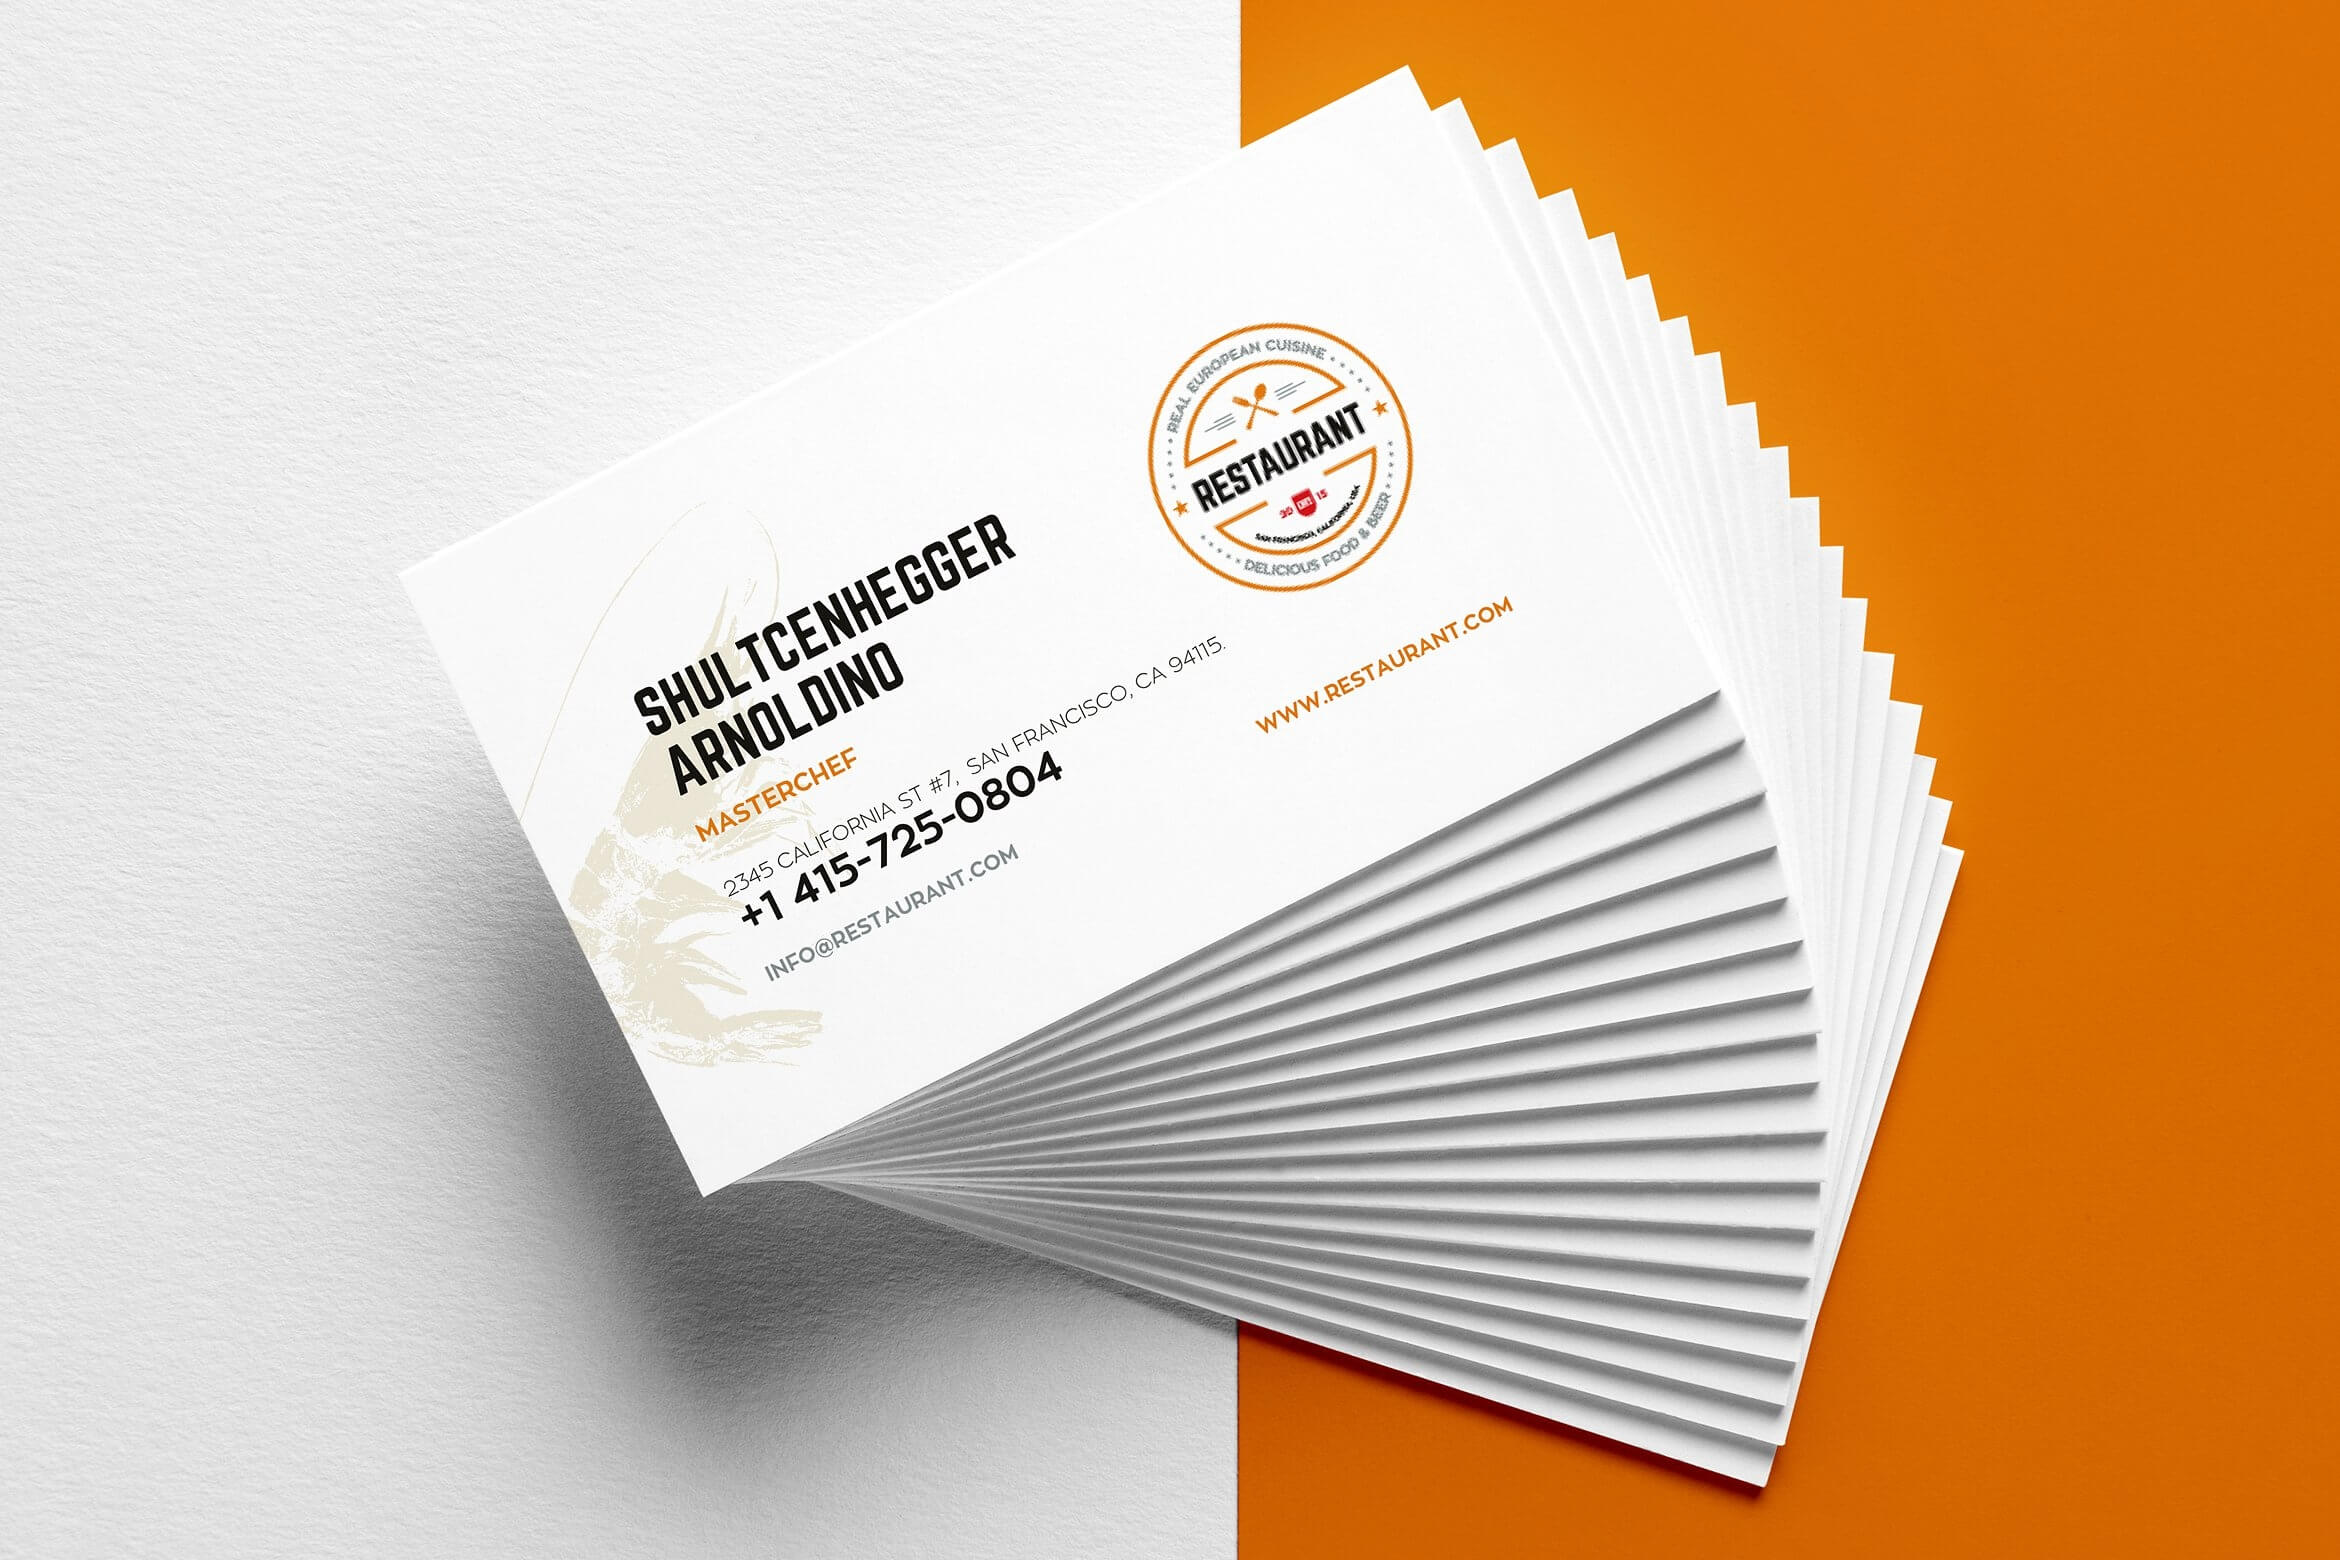 013 Business Card Templates For Word Best Of Free Printable Regarding Microsoft Templates For Business Cards